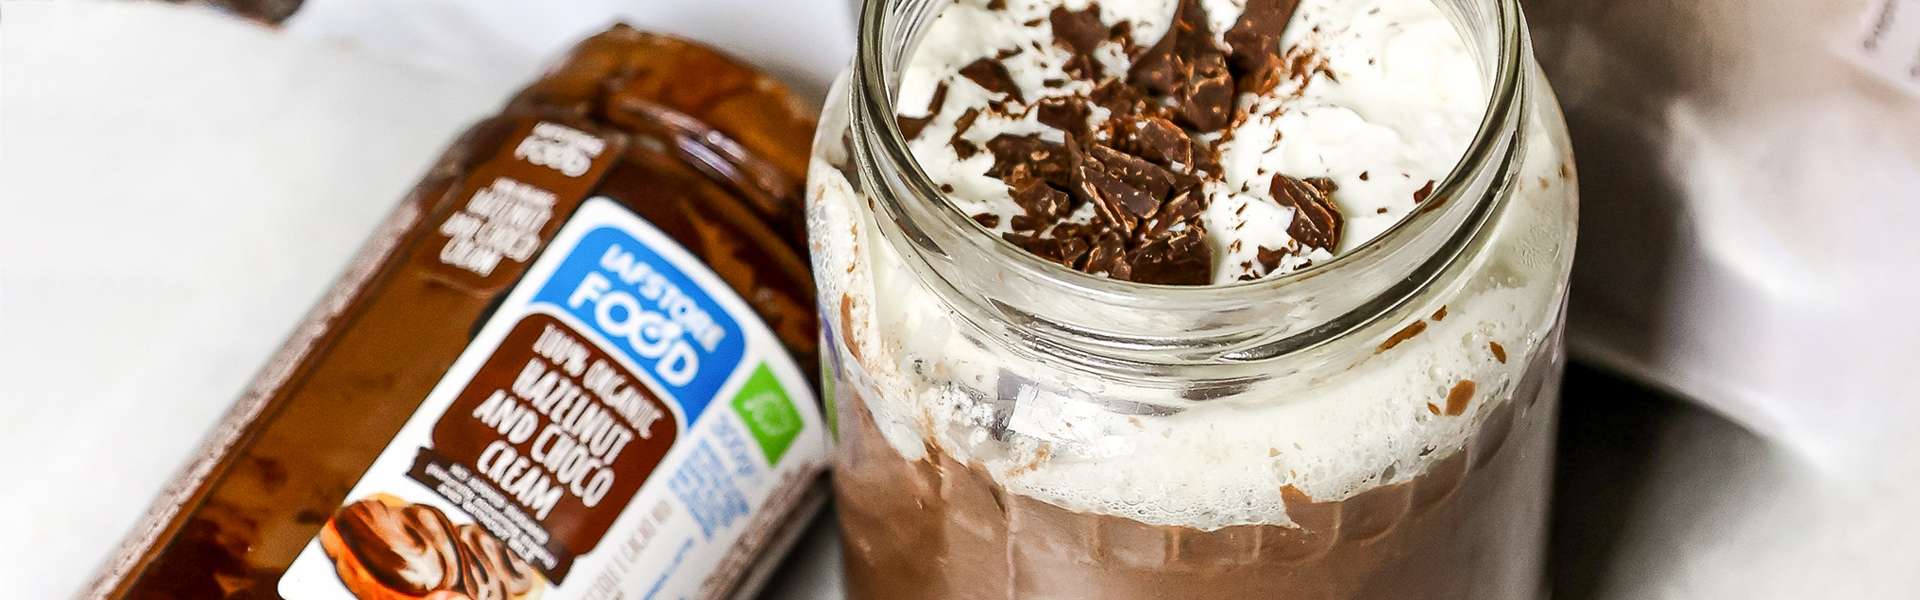 Hot chocolate without sugar